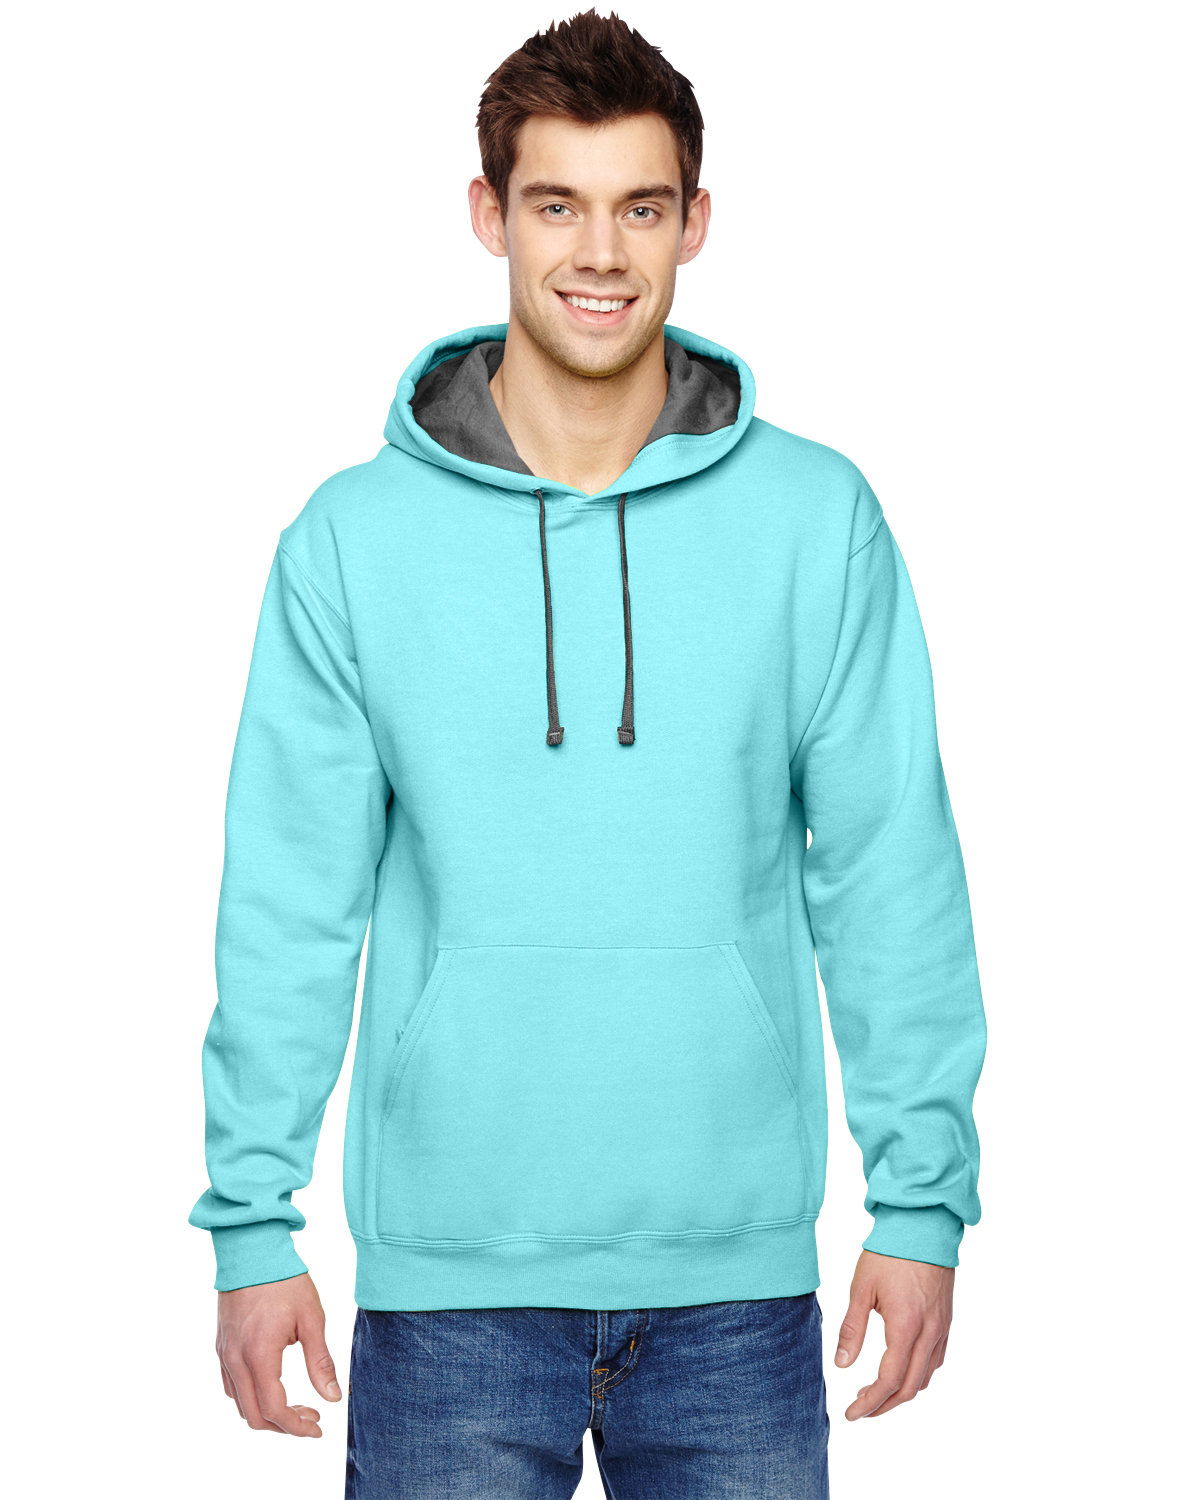 Picture of Fruit of the Loom Adult SofSpun® Hooded Sweatshirt 